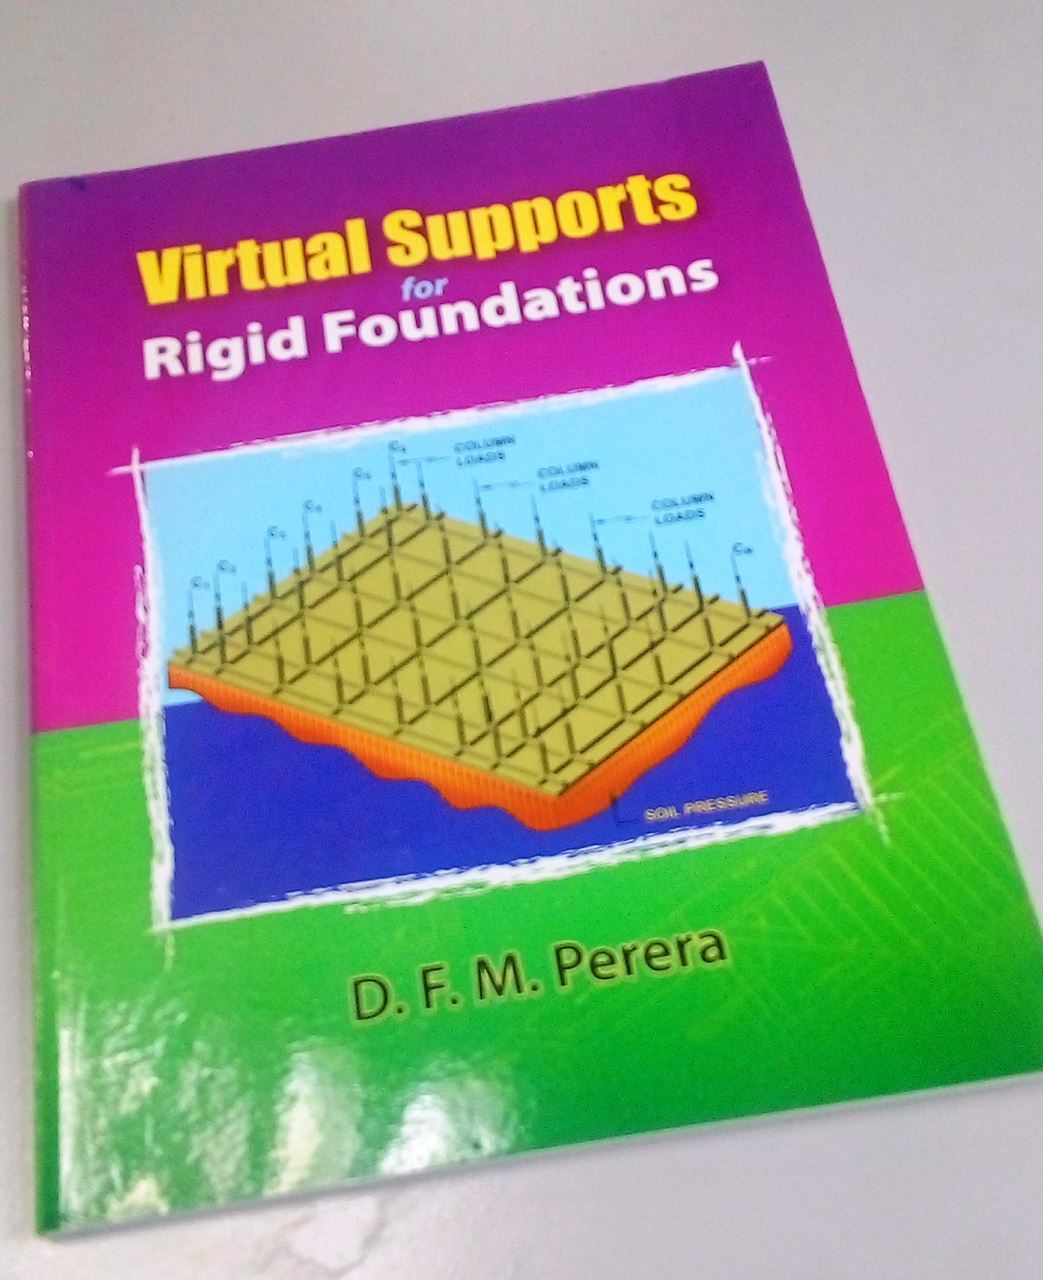 Virtual Supports for Rigid Foundations